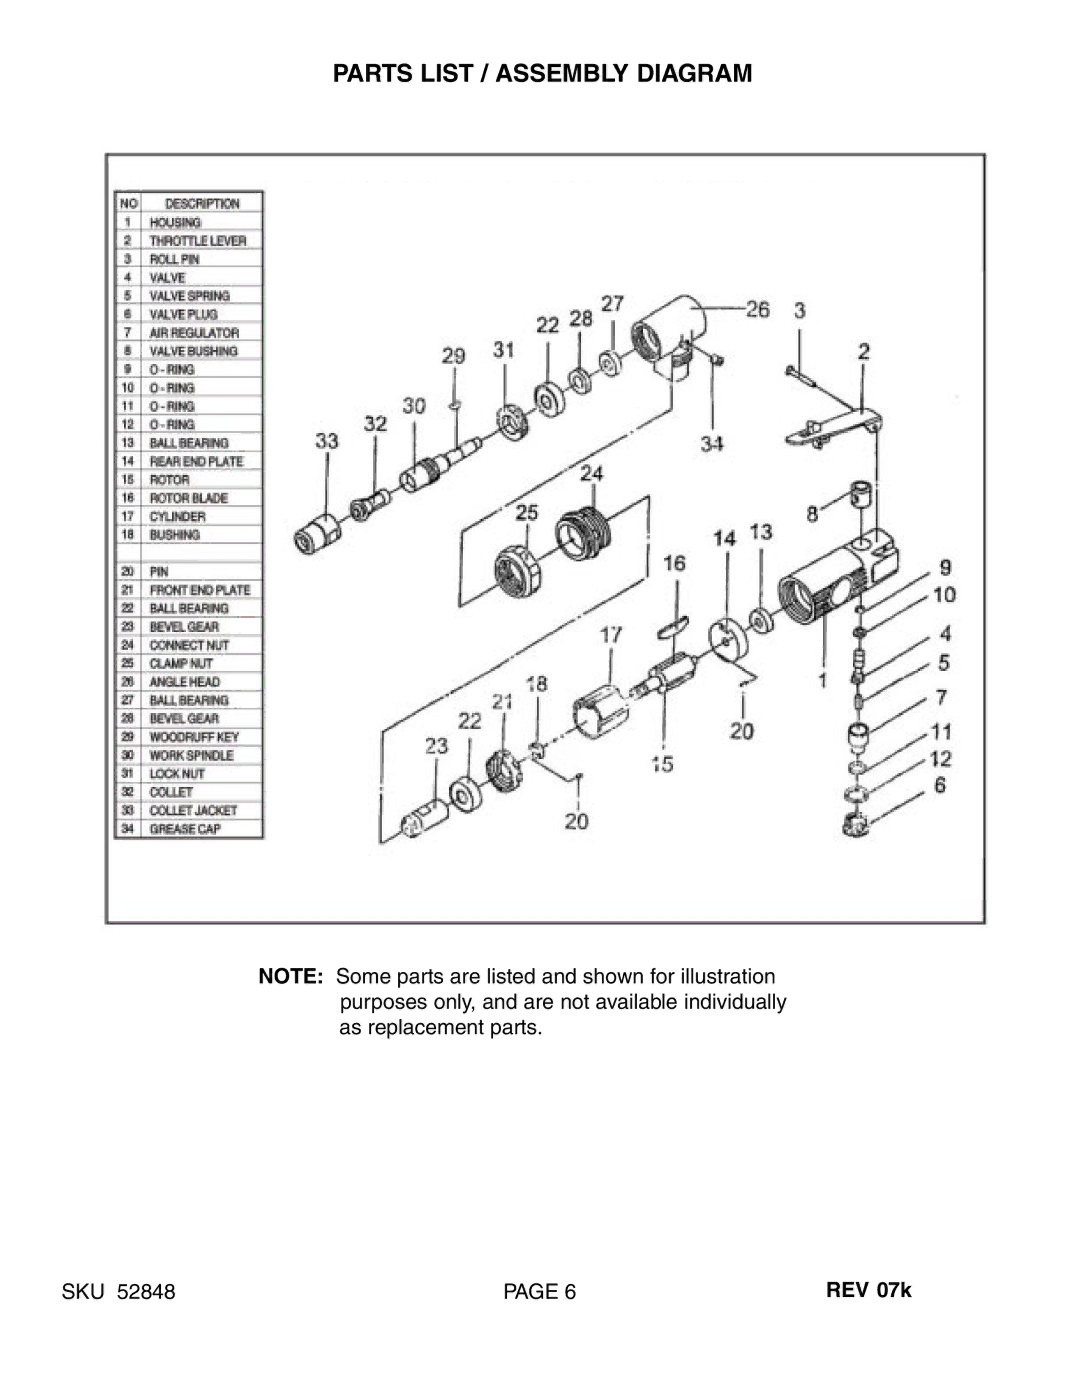 Harbor Freight Tools 52848 manual Parts List / Assembly Diagram 